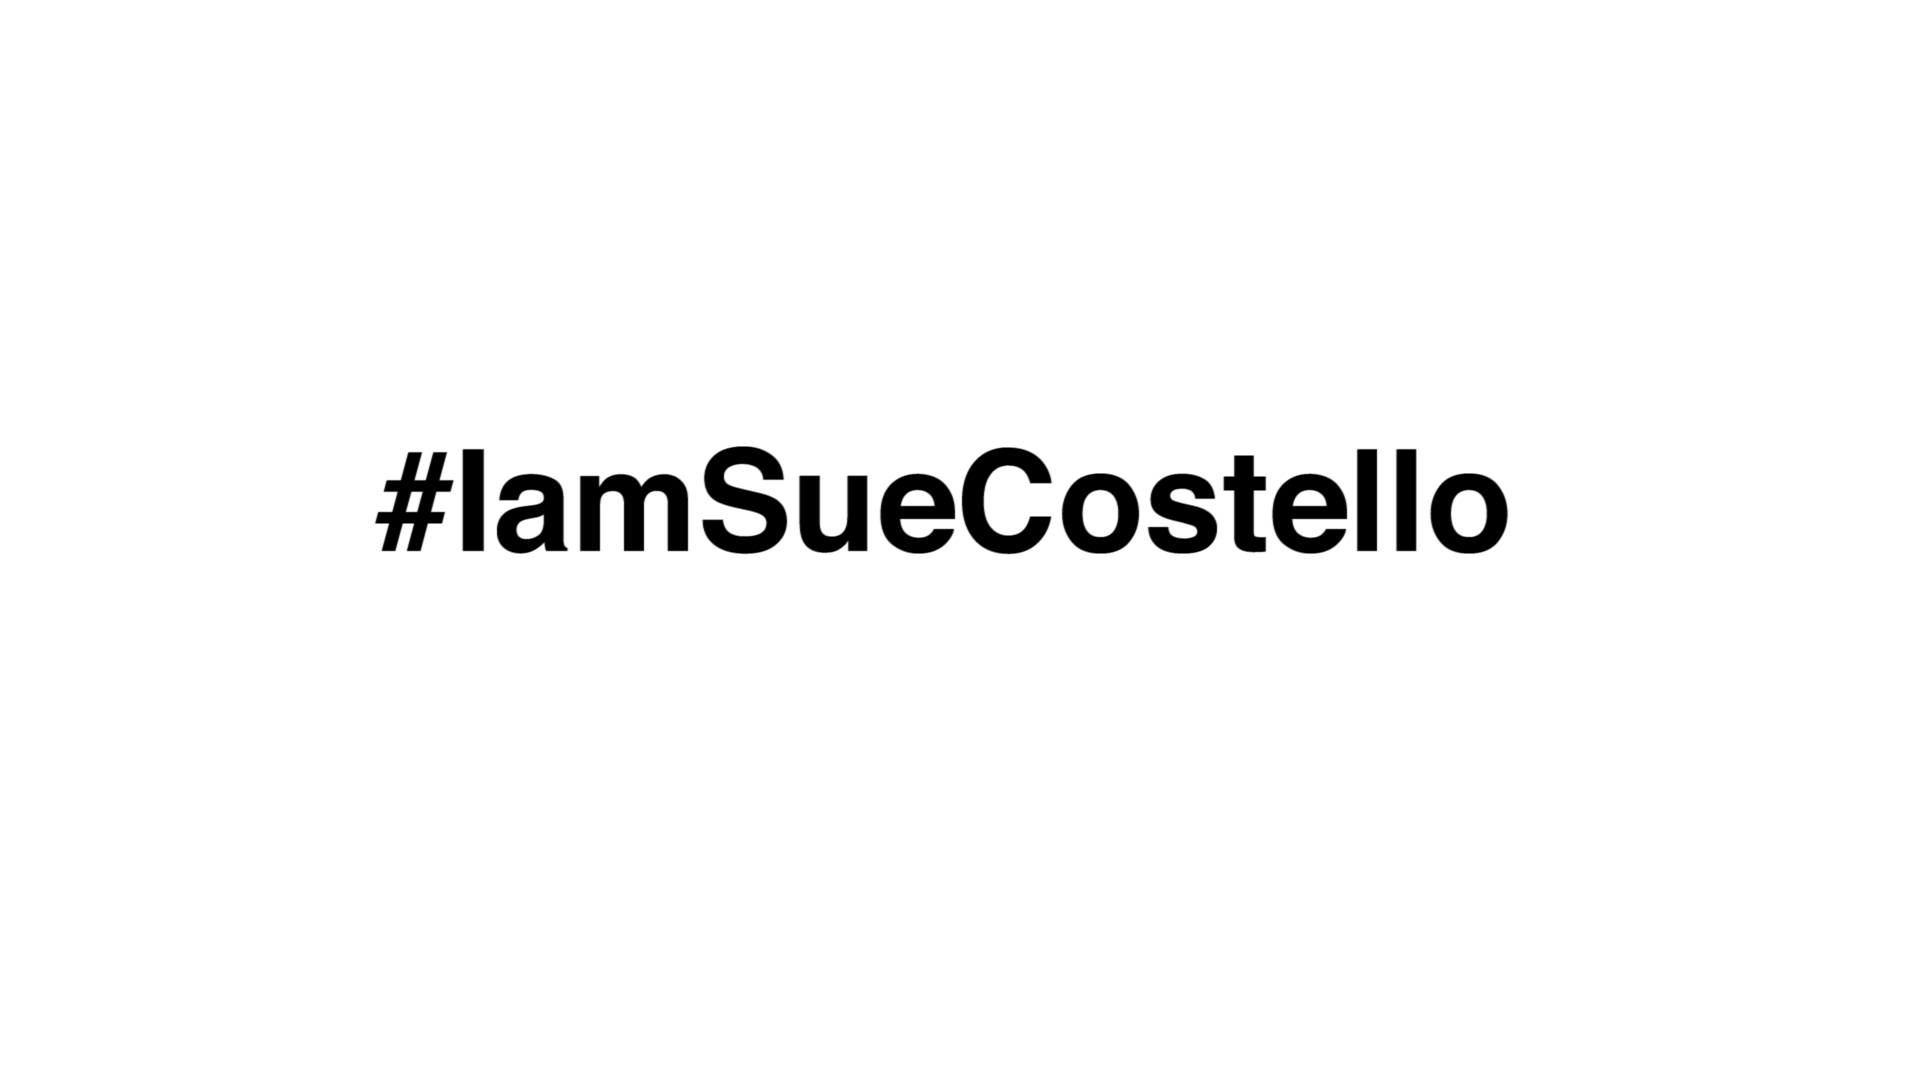 #IamSueCostello at Broadway Comedy Club Tuesday, March 28th